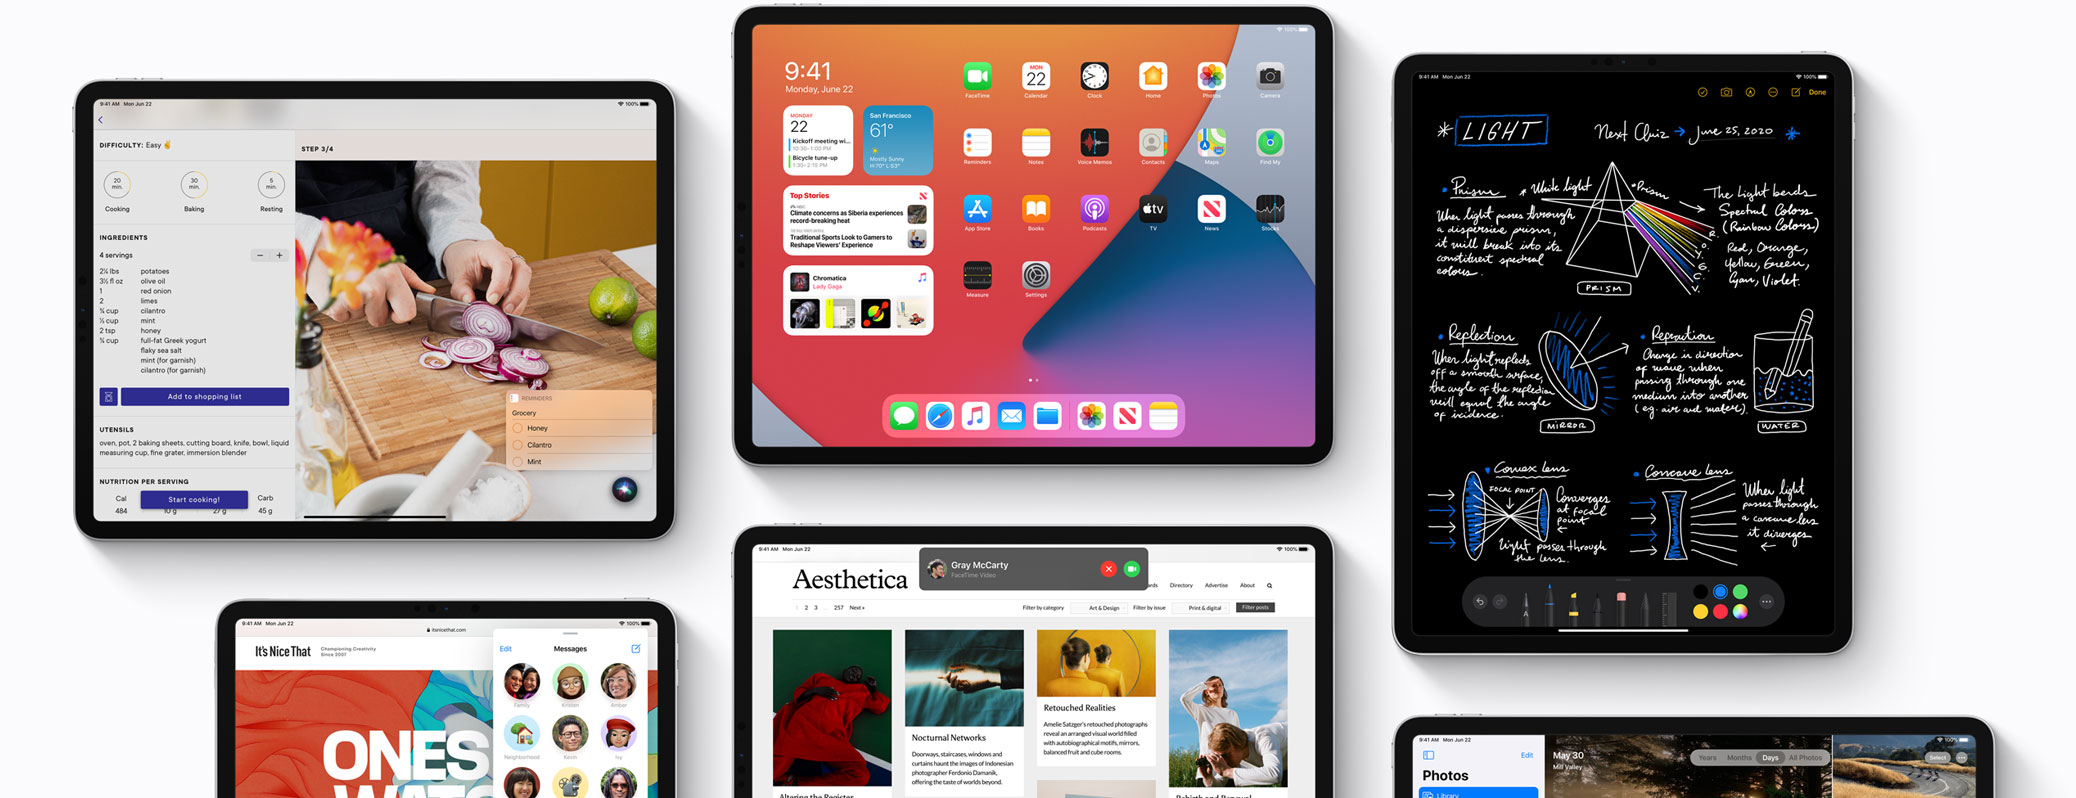 iPadOS 14 – New features announced at WWDC 2020